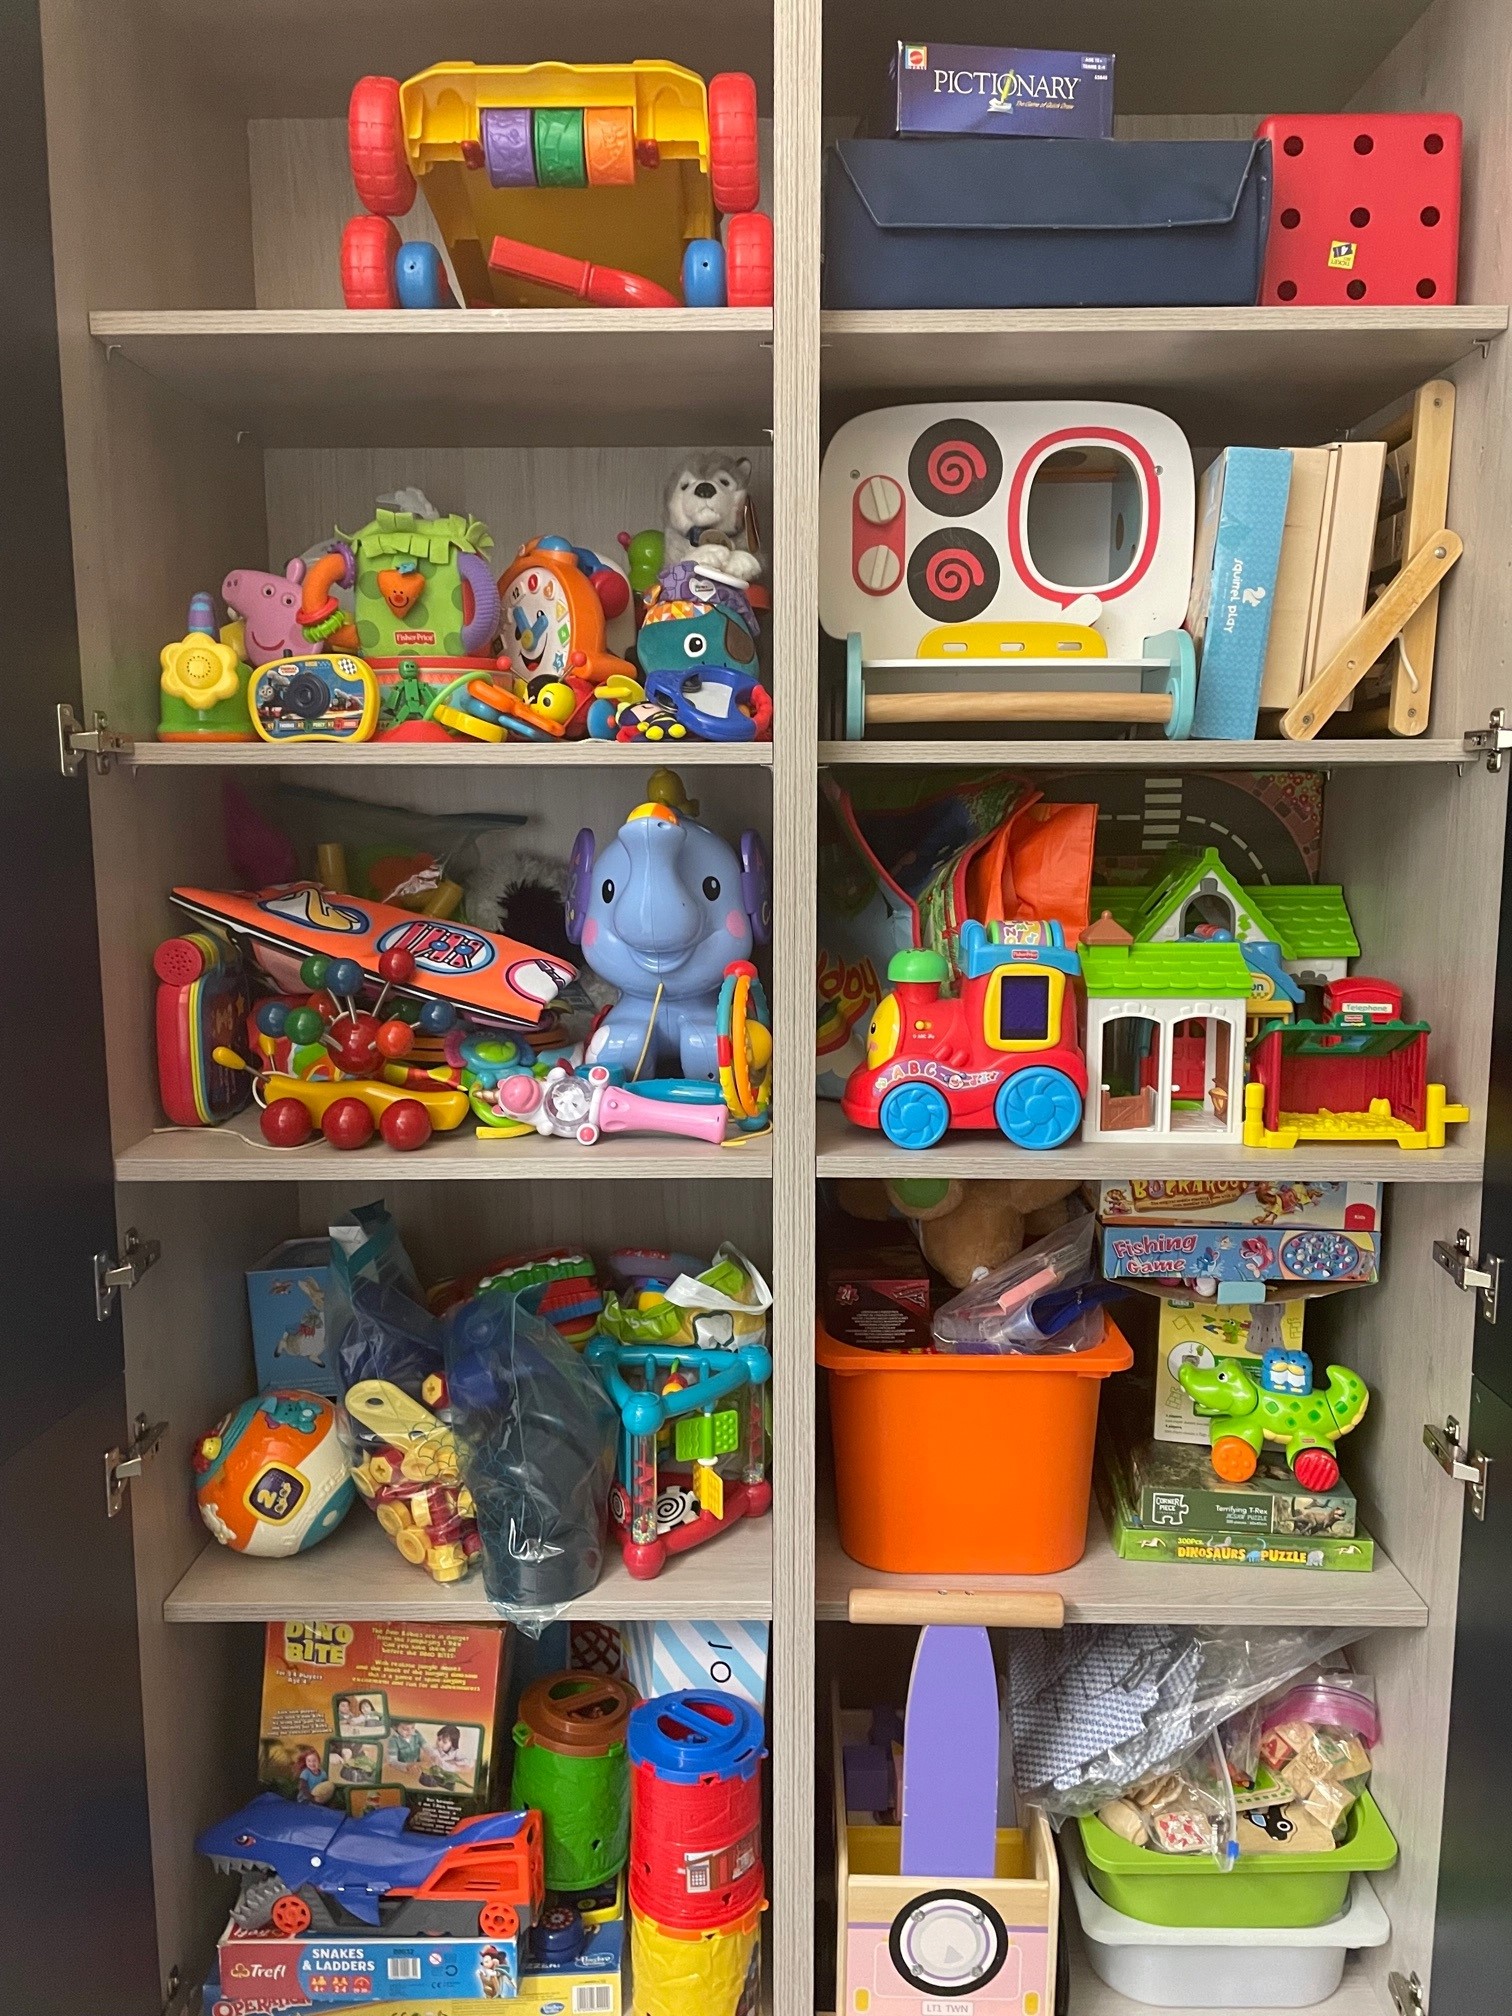 Toy library image